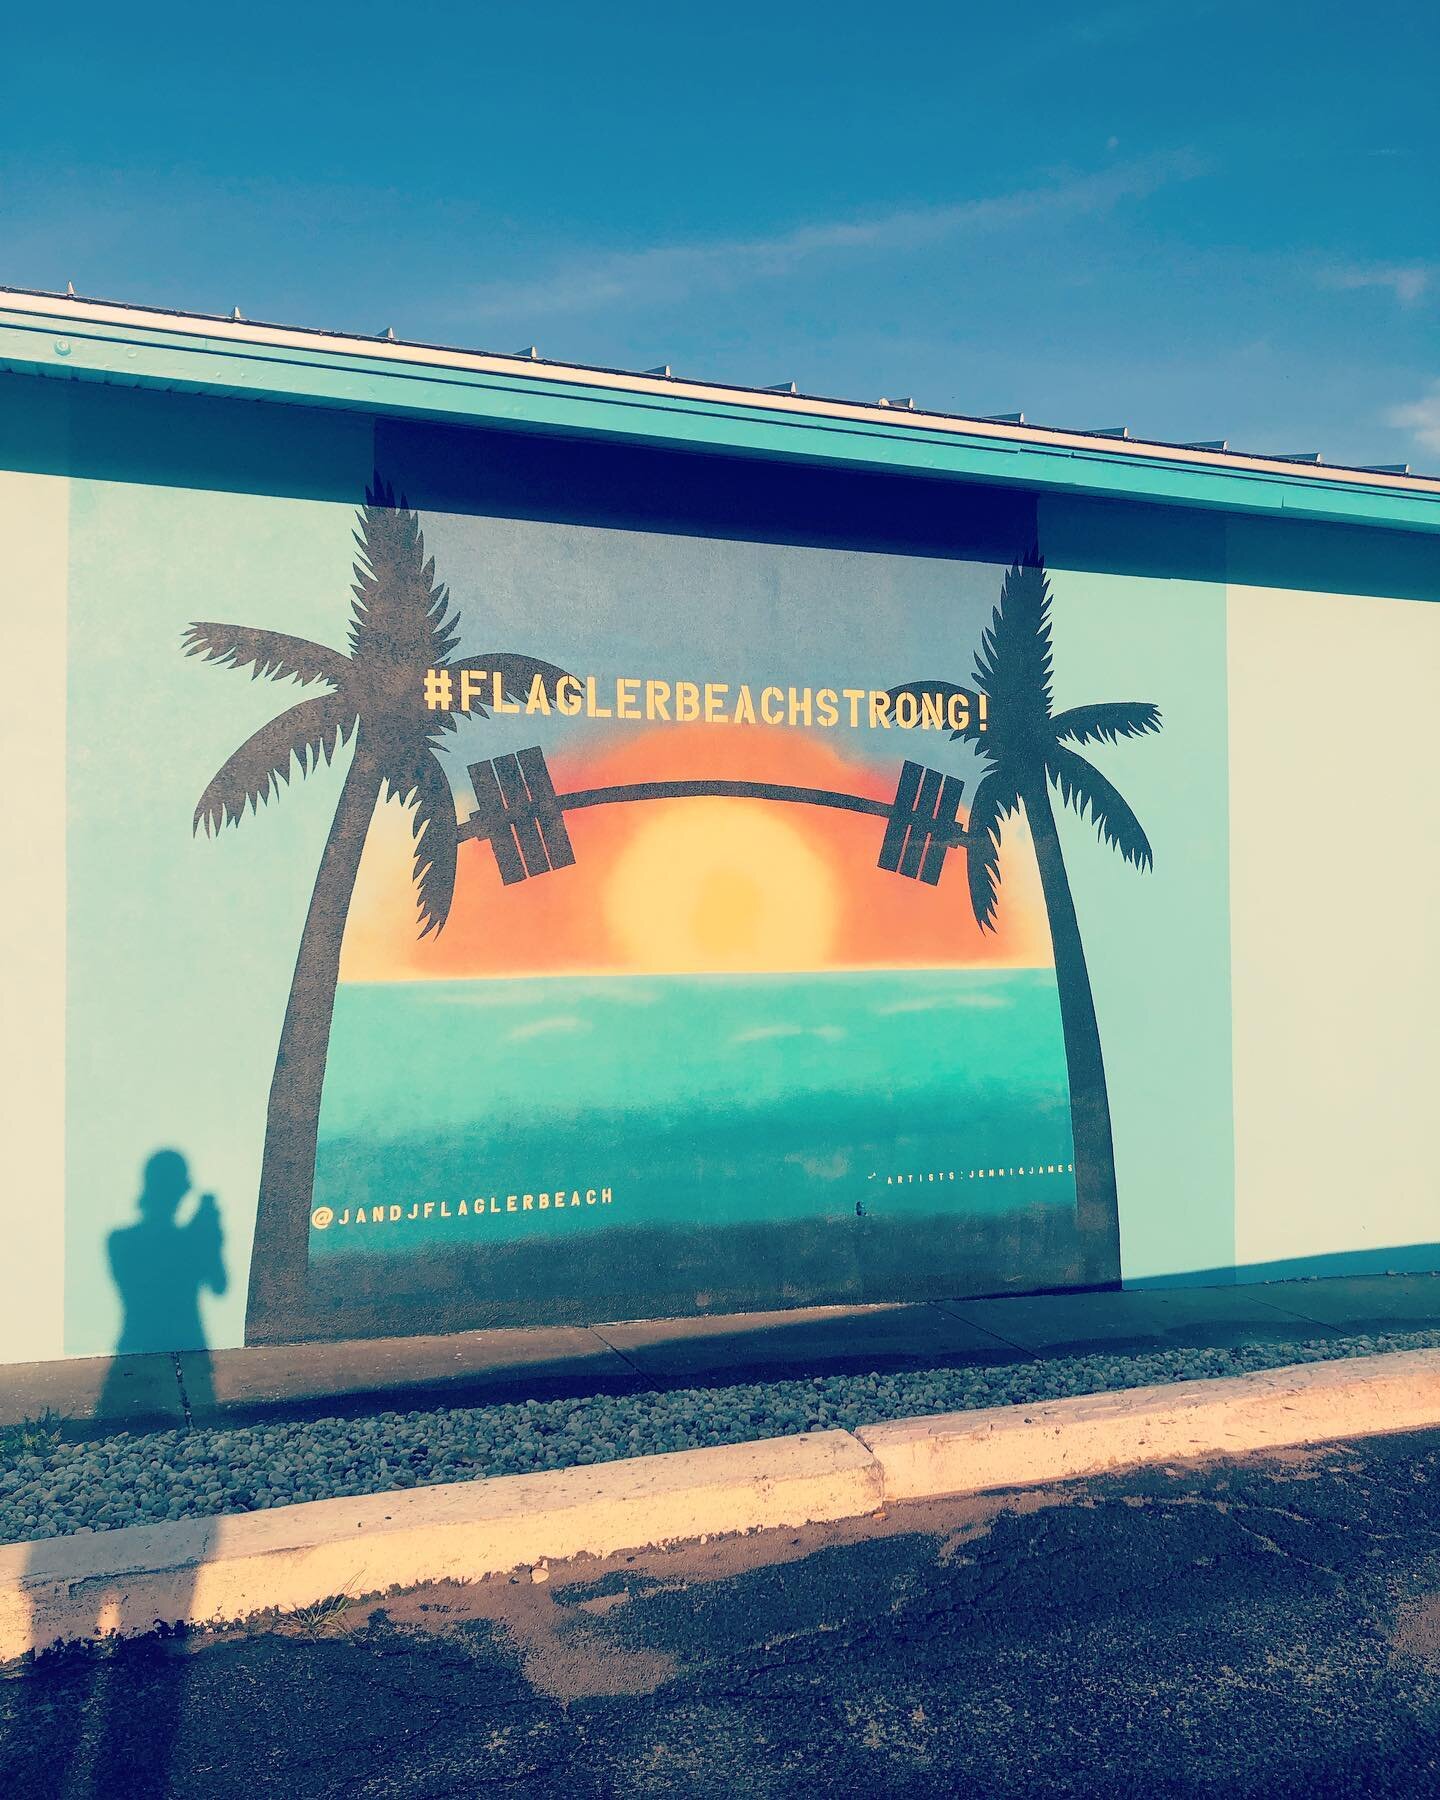 😍LOVE THIS MURAL! I golf cart up to the bridge to get some fun morning workouts in!🛺
&bull;
Book now online at flaglerbeachgolfcarts.com or 
📲386-845-4513

&bull;
&bull;
&bull;

#golfcart #golfcartrental #golfcartrentals #flaglerbeach #hammockbeac